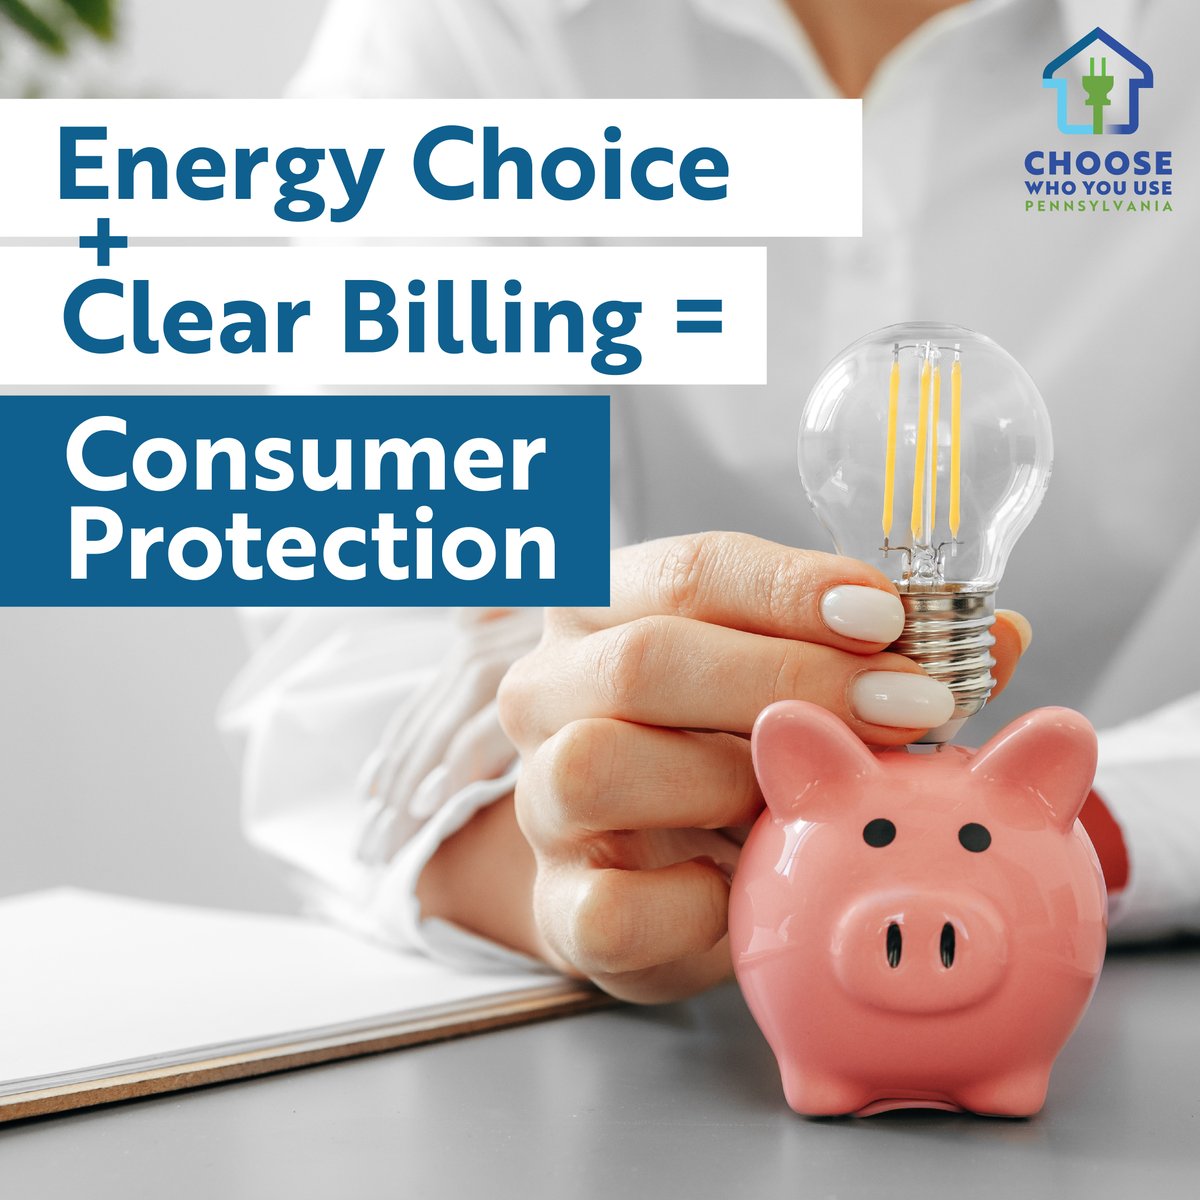 Consumers deserve more options and control over their energy decisions. #DirectBilling would make it easier for you to work with the #EnergySupplier of your choice  – offering products and services designed to maximize savings for your home or business. #ChooseWhoYouUse